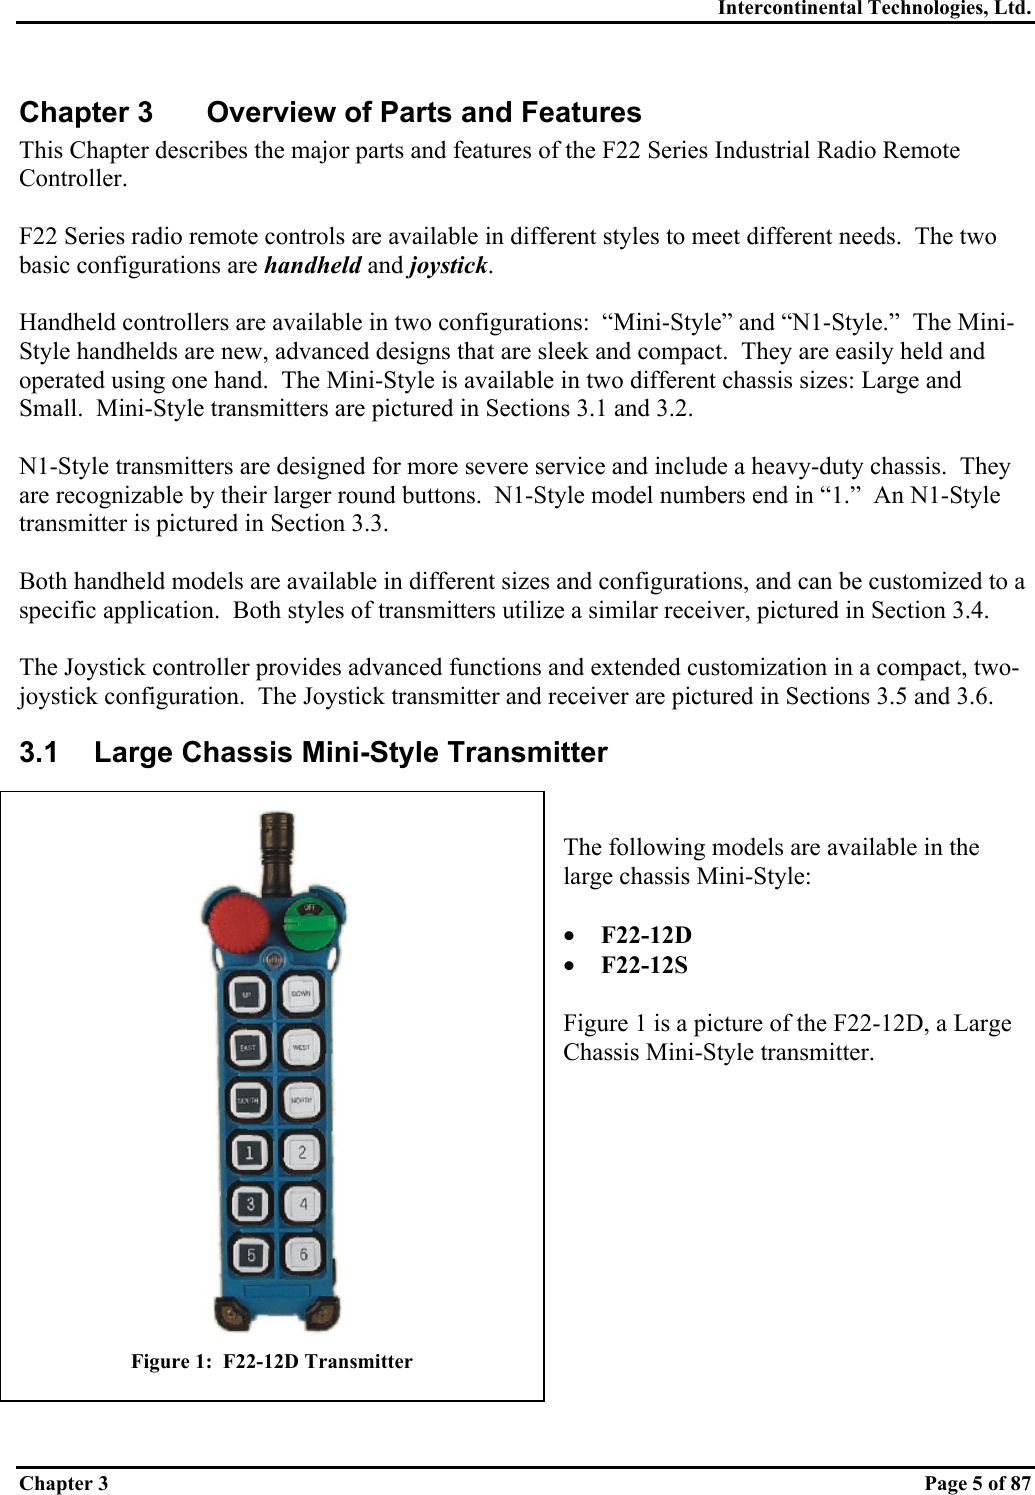 Intercontinental Technologies, Ltd. Chapter 3    Page 5 of 87 Chapter 3  Overview of Parts and Features This Chapter describes the major parts and features of the F22 Series Industrial Radio Remote Controller.  F22 Series radio remote controls are available in different styles to meet different needs.  The two basic configurations are handheld and joystick.  Handheld controllers are available in two configurations:  “Mini-Style” and “N1-Style.”  The Mini-Style handhelds are new, advanced designs that are sleek and compact.  They are easily held and operated using one hand.  The Mini-Style is available in two different chassis sizes: Large and Small.  Mini-Style transmitters are pictured in Sections 3.1 and 3.2.  N1-Style transmitters are designed for more severe service and include a heavy-duty chassis.  They are recognizable by their larger round buttons.  N1-Style model numbers end in “1.”  An N1-Style transmitter is pictured in Section 3.3.  Both handheld models are available in different sizes and configurations, and can be customized to a specific application.  Both styles of transmitters utilize a similar receiver, pictured in Section 3.4.  The Joystick controller provides advanced functions and extended customization in a compact, two-joystick configuration.  The Joystick transmitter and receiver are pictured in Sections 3.5 and 3.6. 3.1  Large Chassis Mini-Style Transmitter   The following models are available in the large chassis Mini-Style:  •  F22-12D •  F22-12S  Figure 1 is a picture of the F22-12D, a Large Chassis Mini-Style transmitter.              Figure 1:  F22-12D Transmitter 